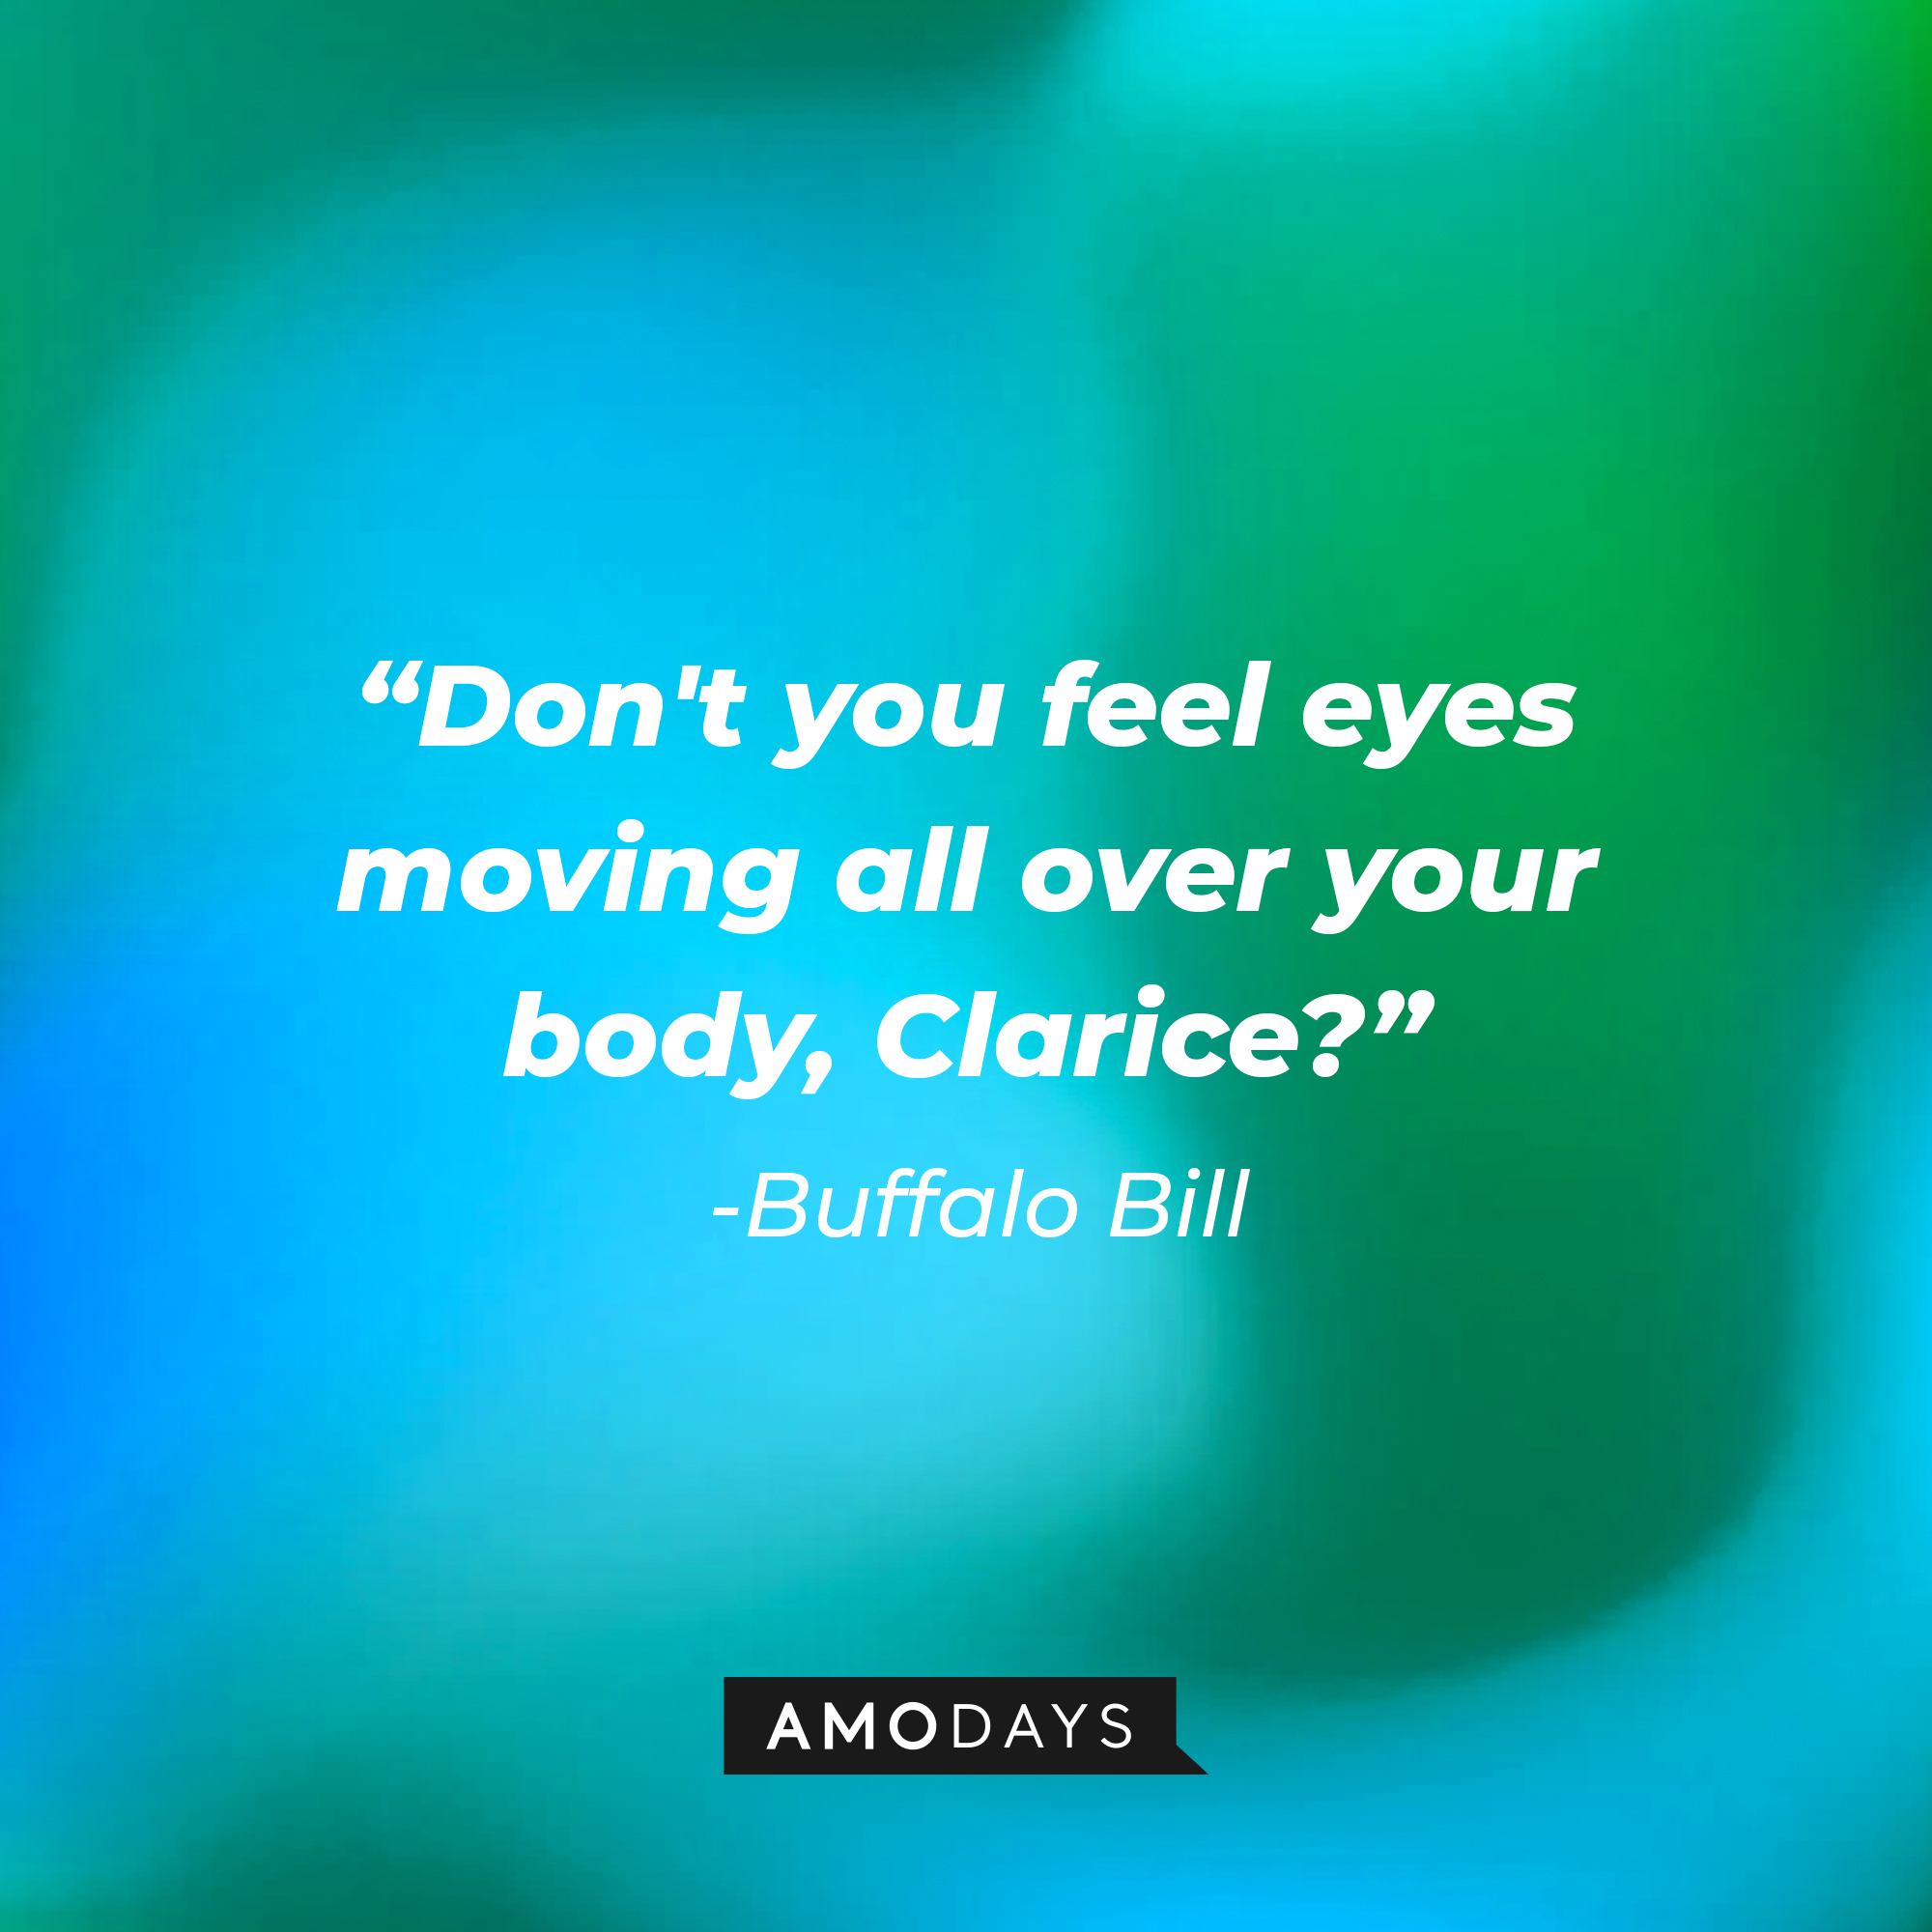 Buffalo Bill's quote from "The Silence of the Lambs:" "Don't you feel eyes moving all over your body, Clarice?" | Source: AmoDays